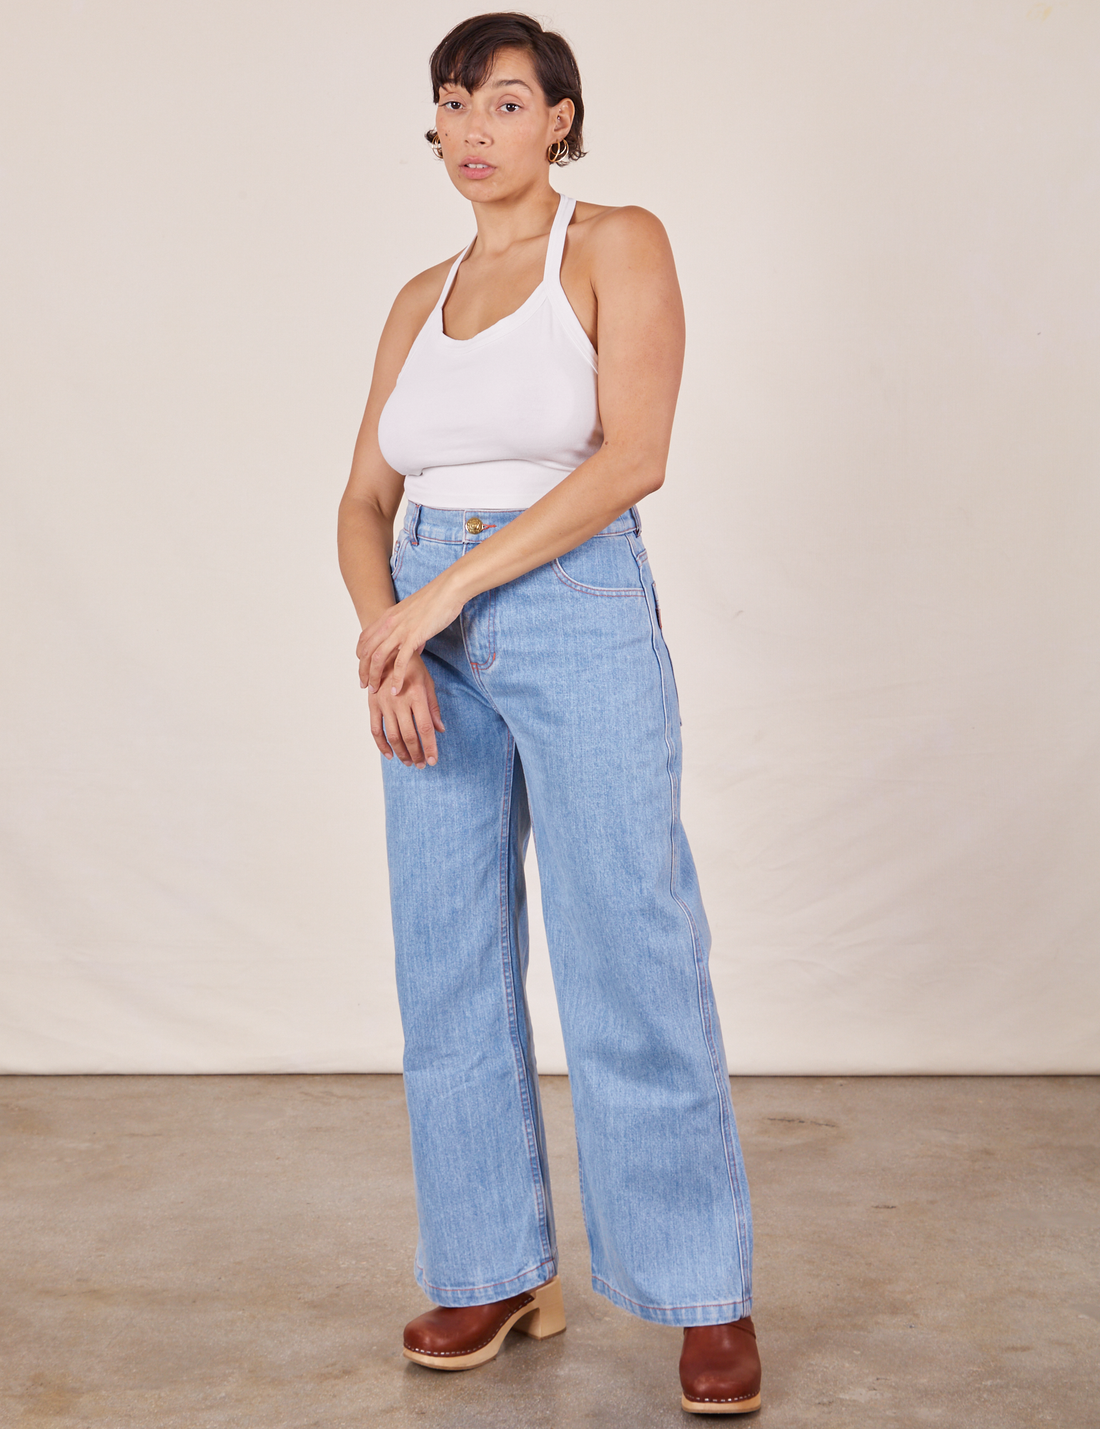 Tiara is wearing Halter Top in Vintage Off-White and light wash Sailor Jeans